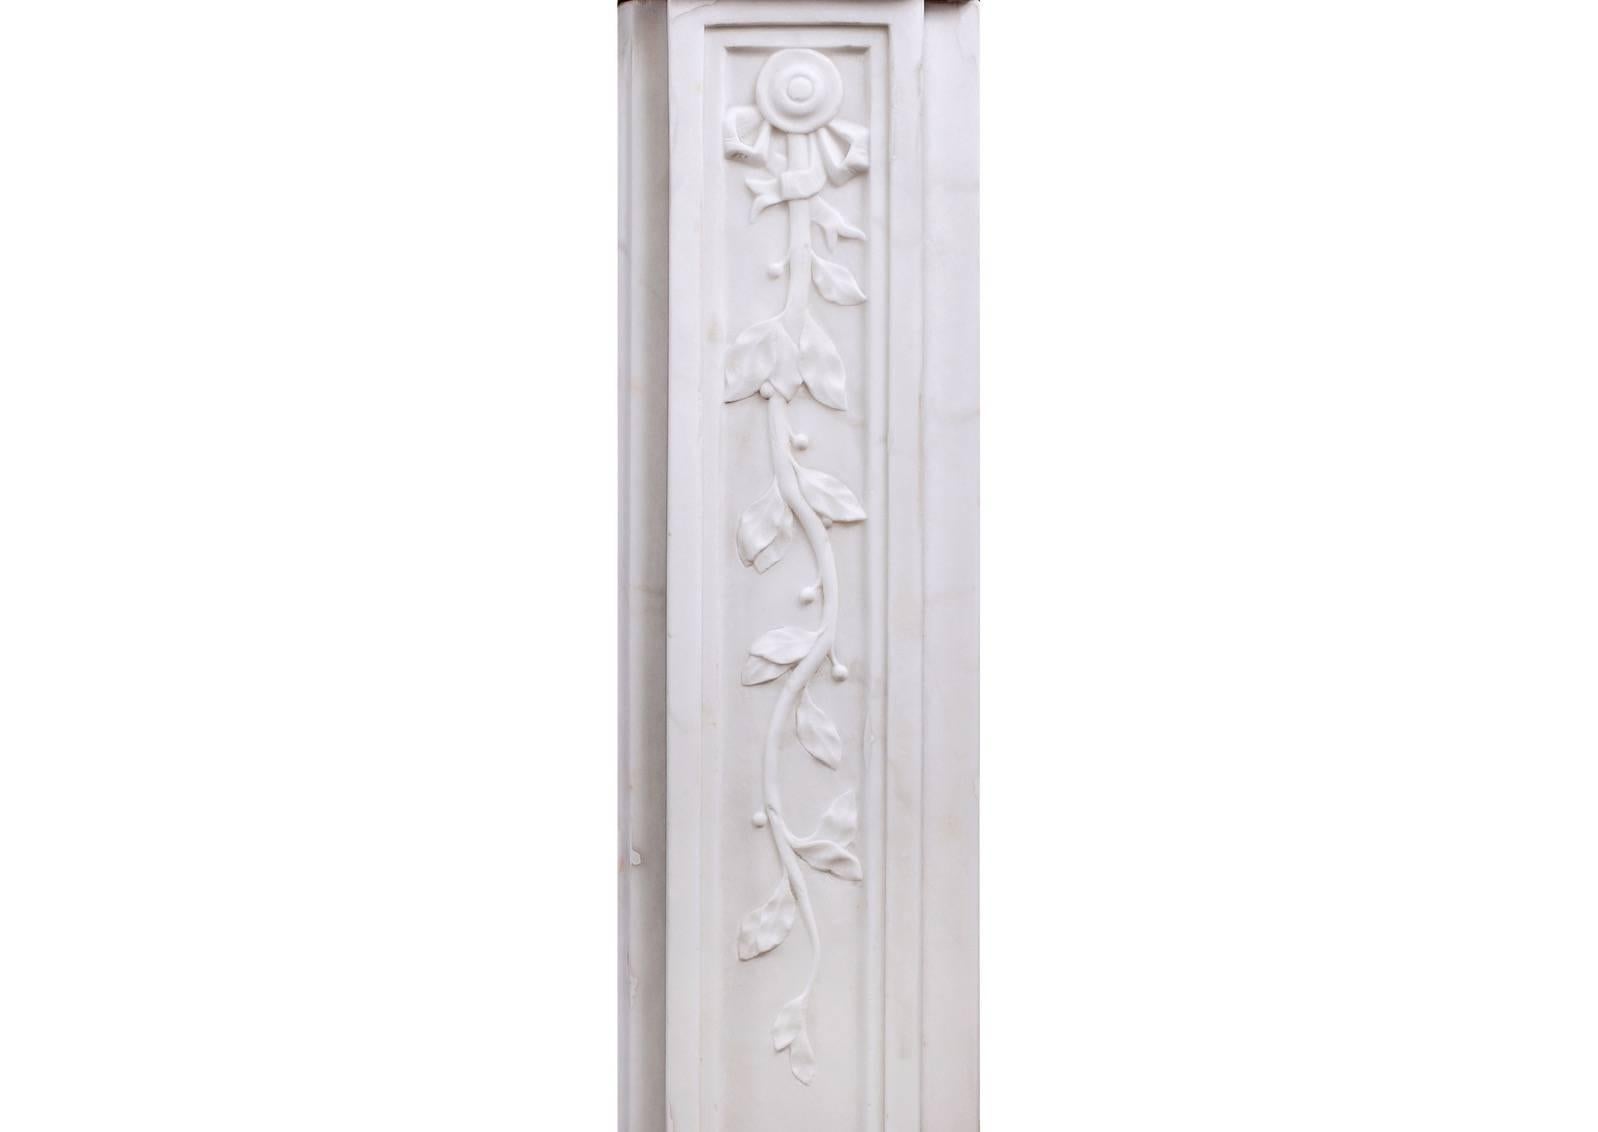 An elegant late 18th century period Louis XVI Statuary marble fireplace. The panelled frieze and jambs with trailing vine leaves, the frieze with centre motif of scrolls and leaves, and the jambs with tied ribbons to top.

Measures: 
Shelf width